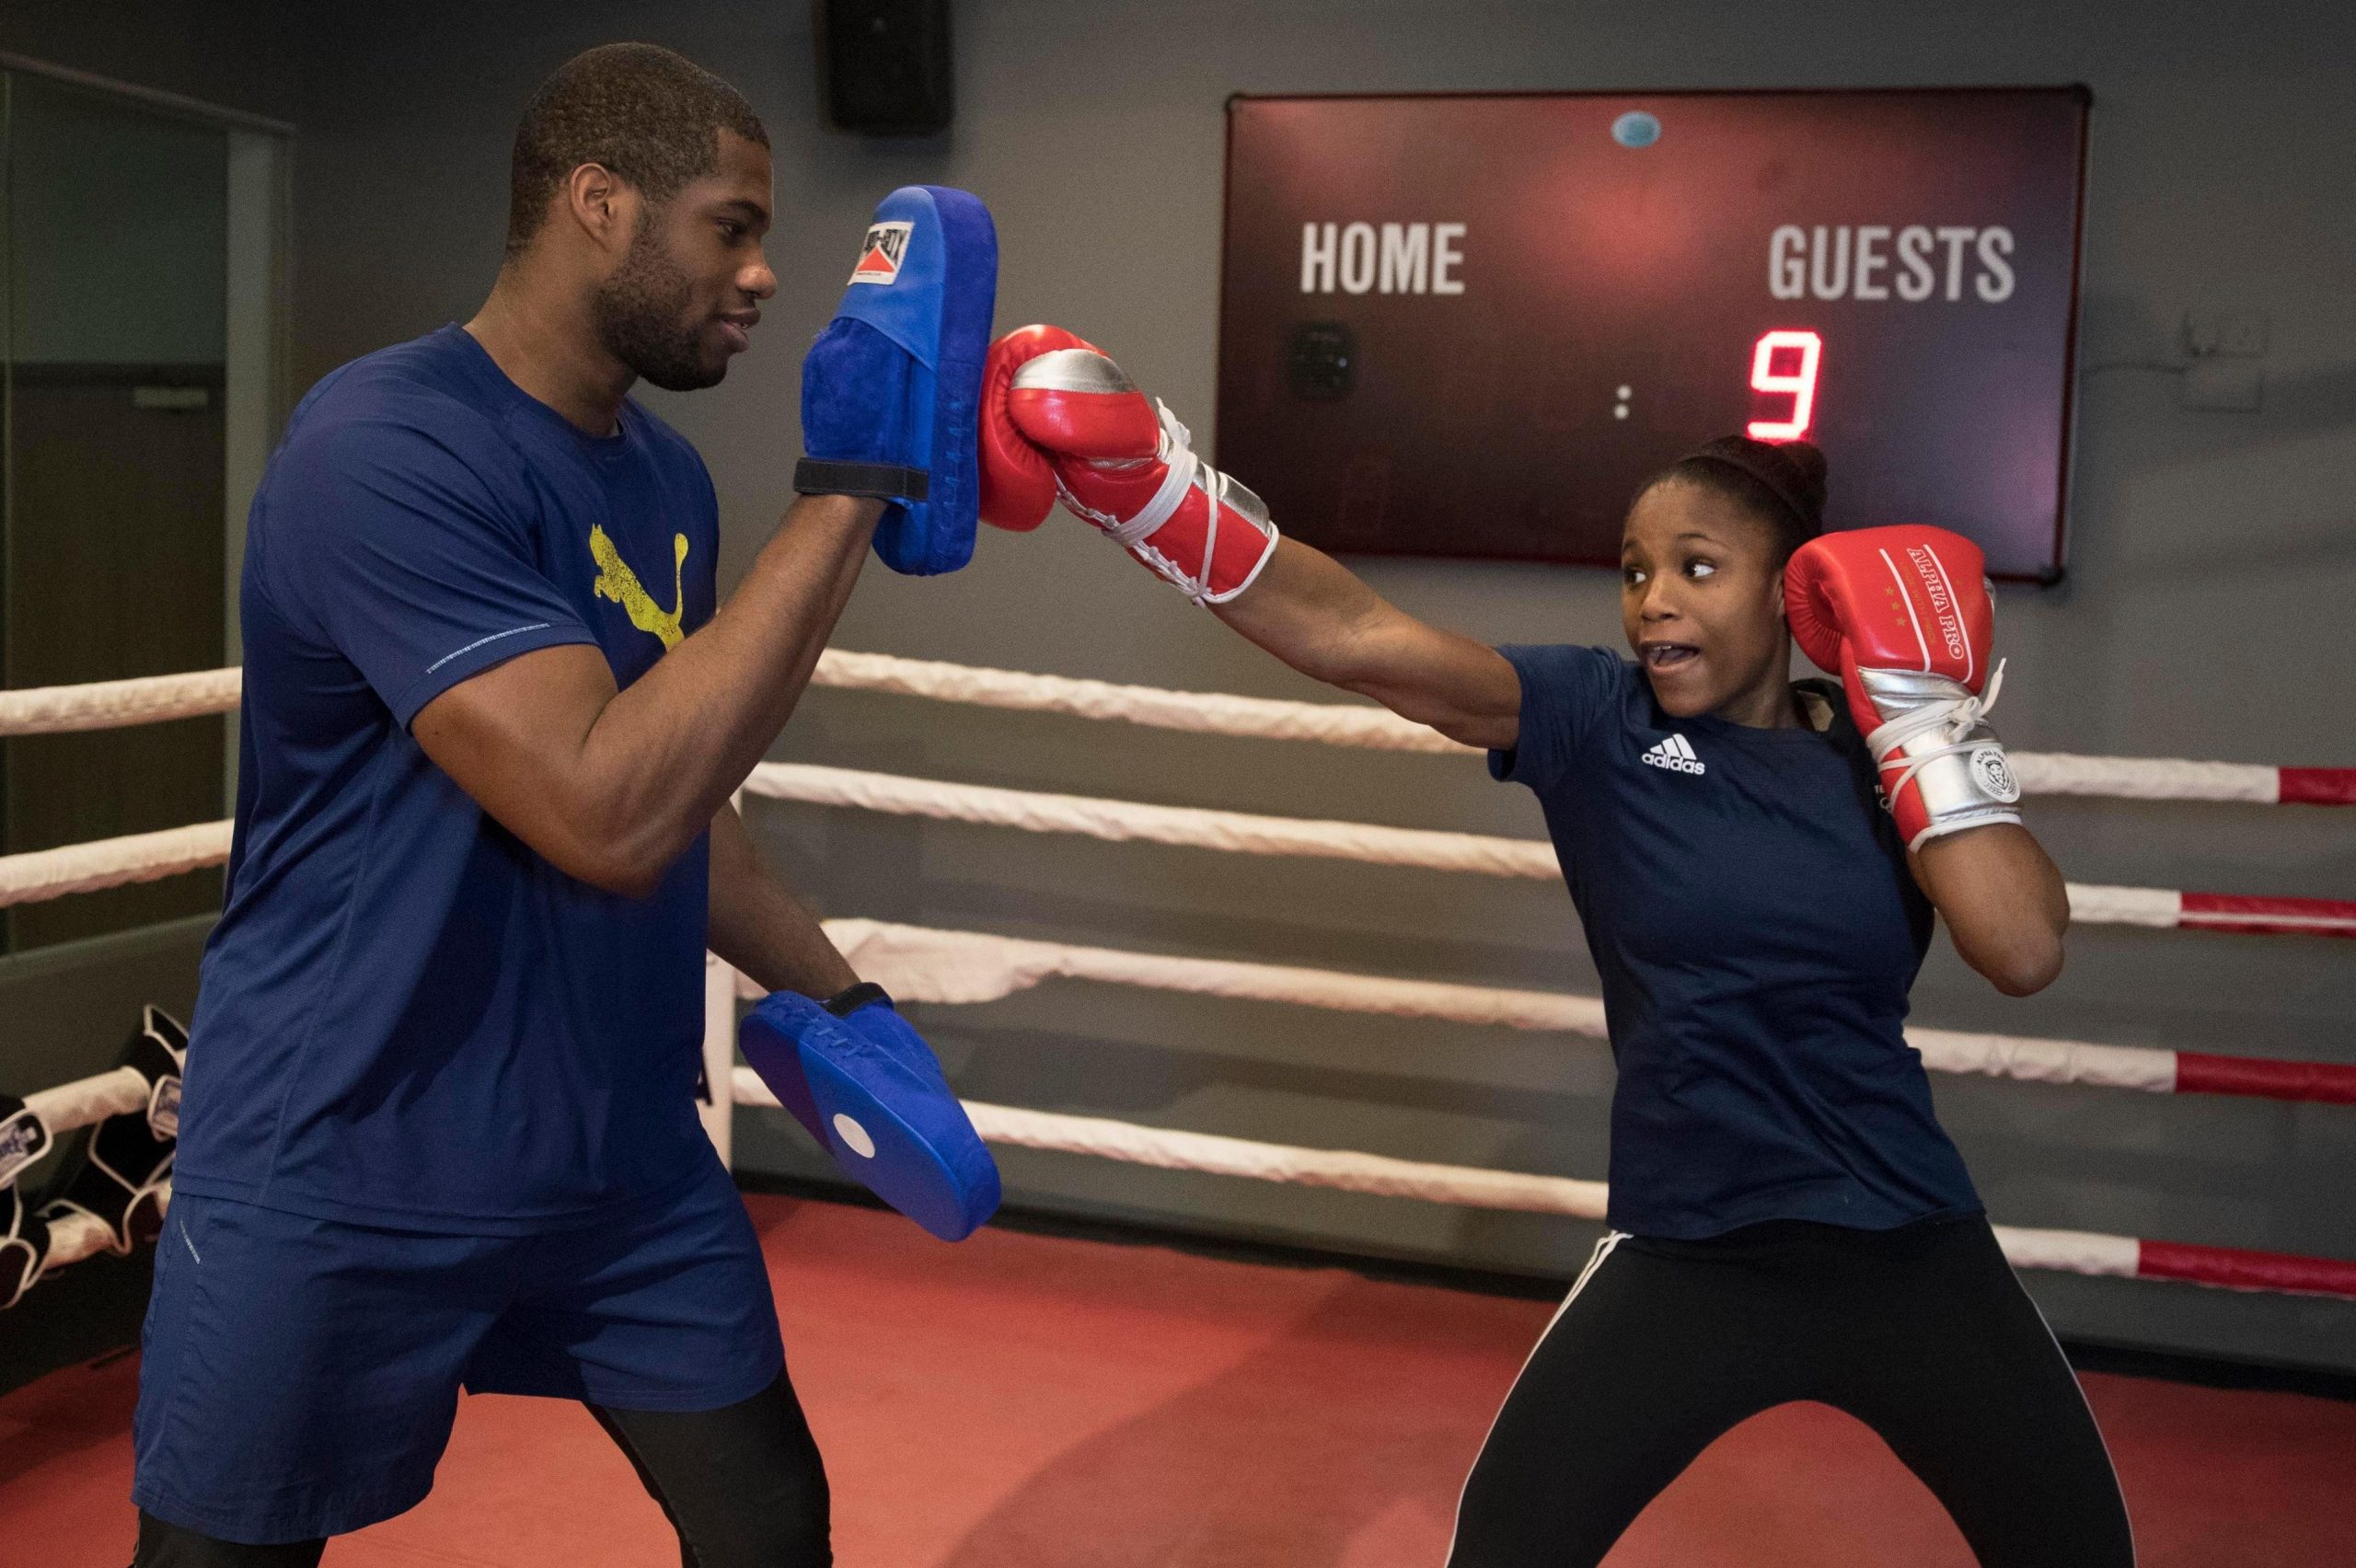 Daniel Dubois claims his sister Caroline Dubois is an "all-round better boxer" - THE SPORTS ROOM